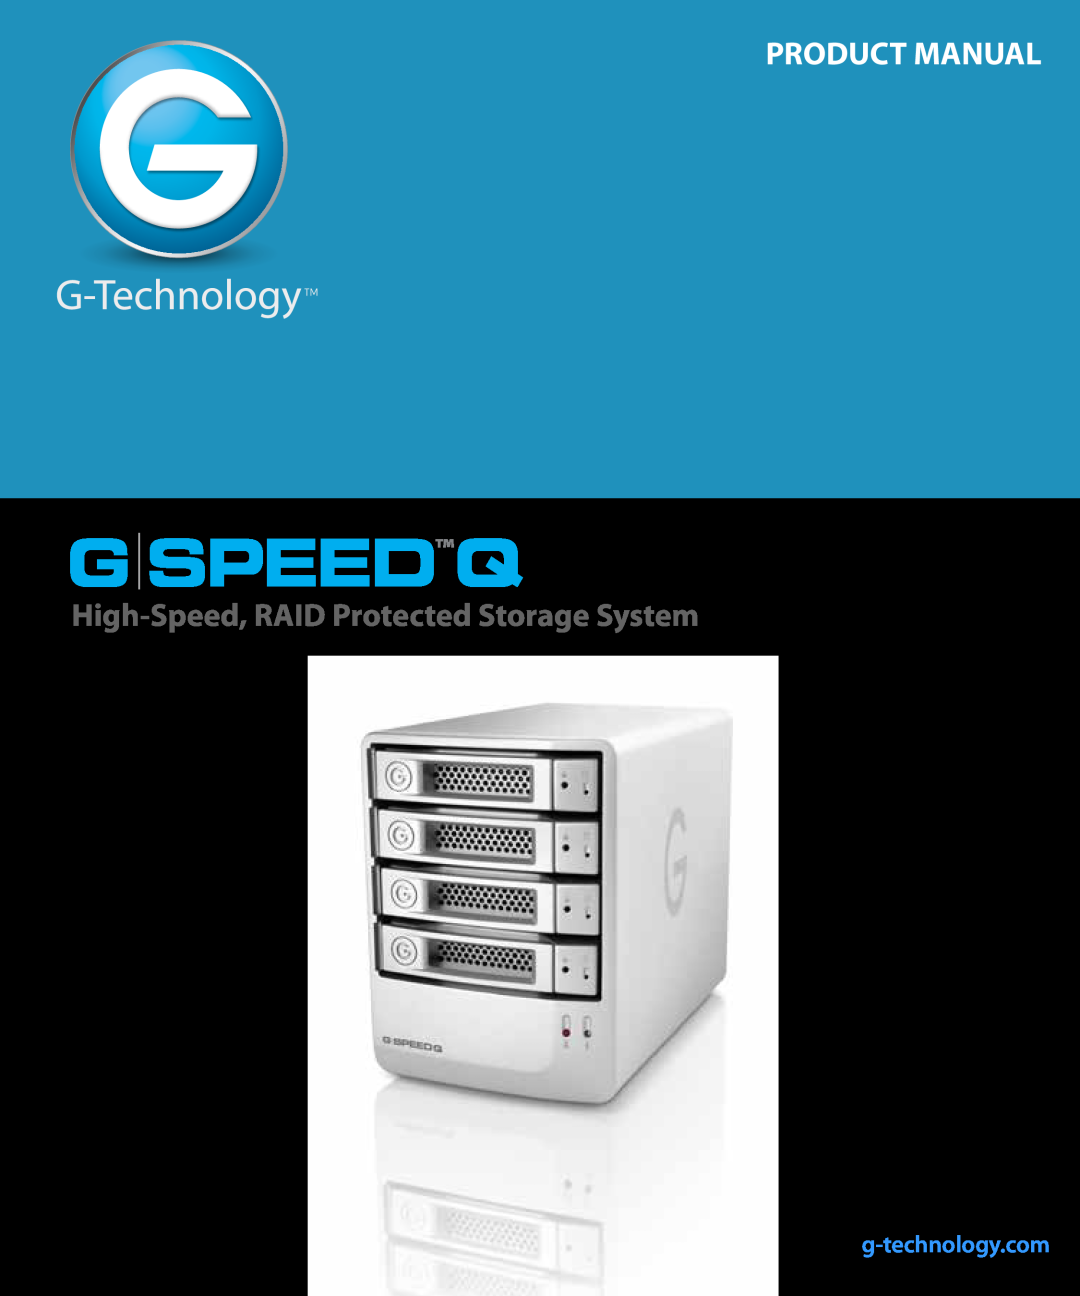 G-Technology 0G02319 manual g-technology.com, G Speedq, Product Manual, High-Speed, RAID Protected Storage System 